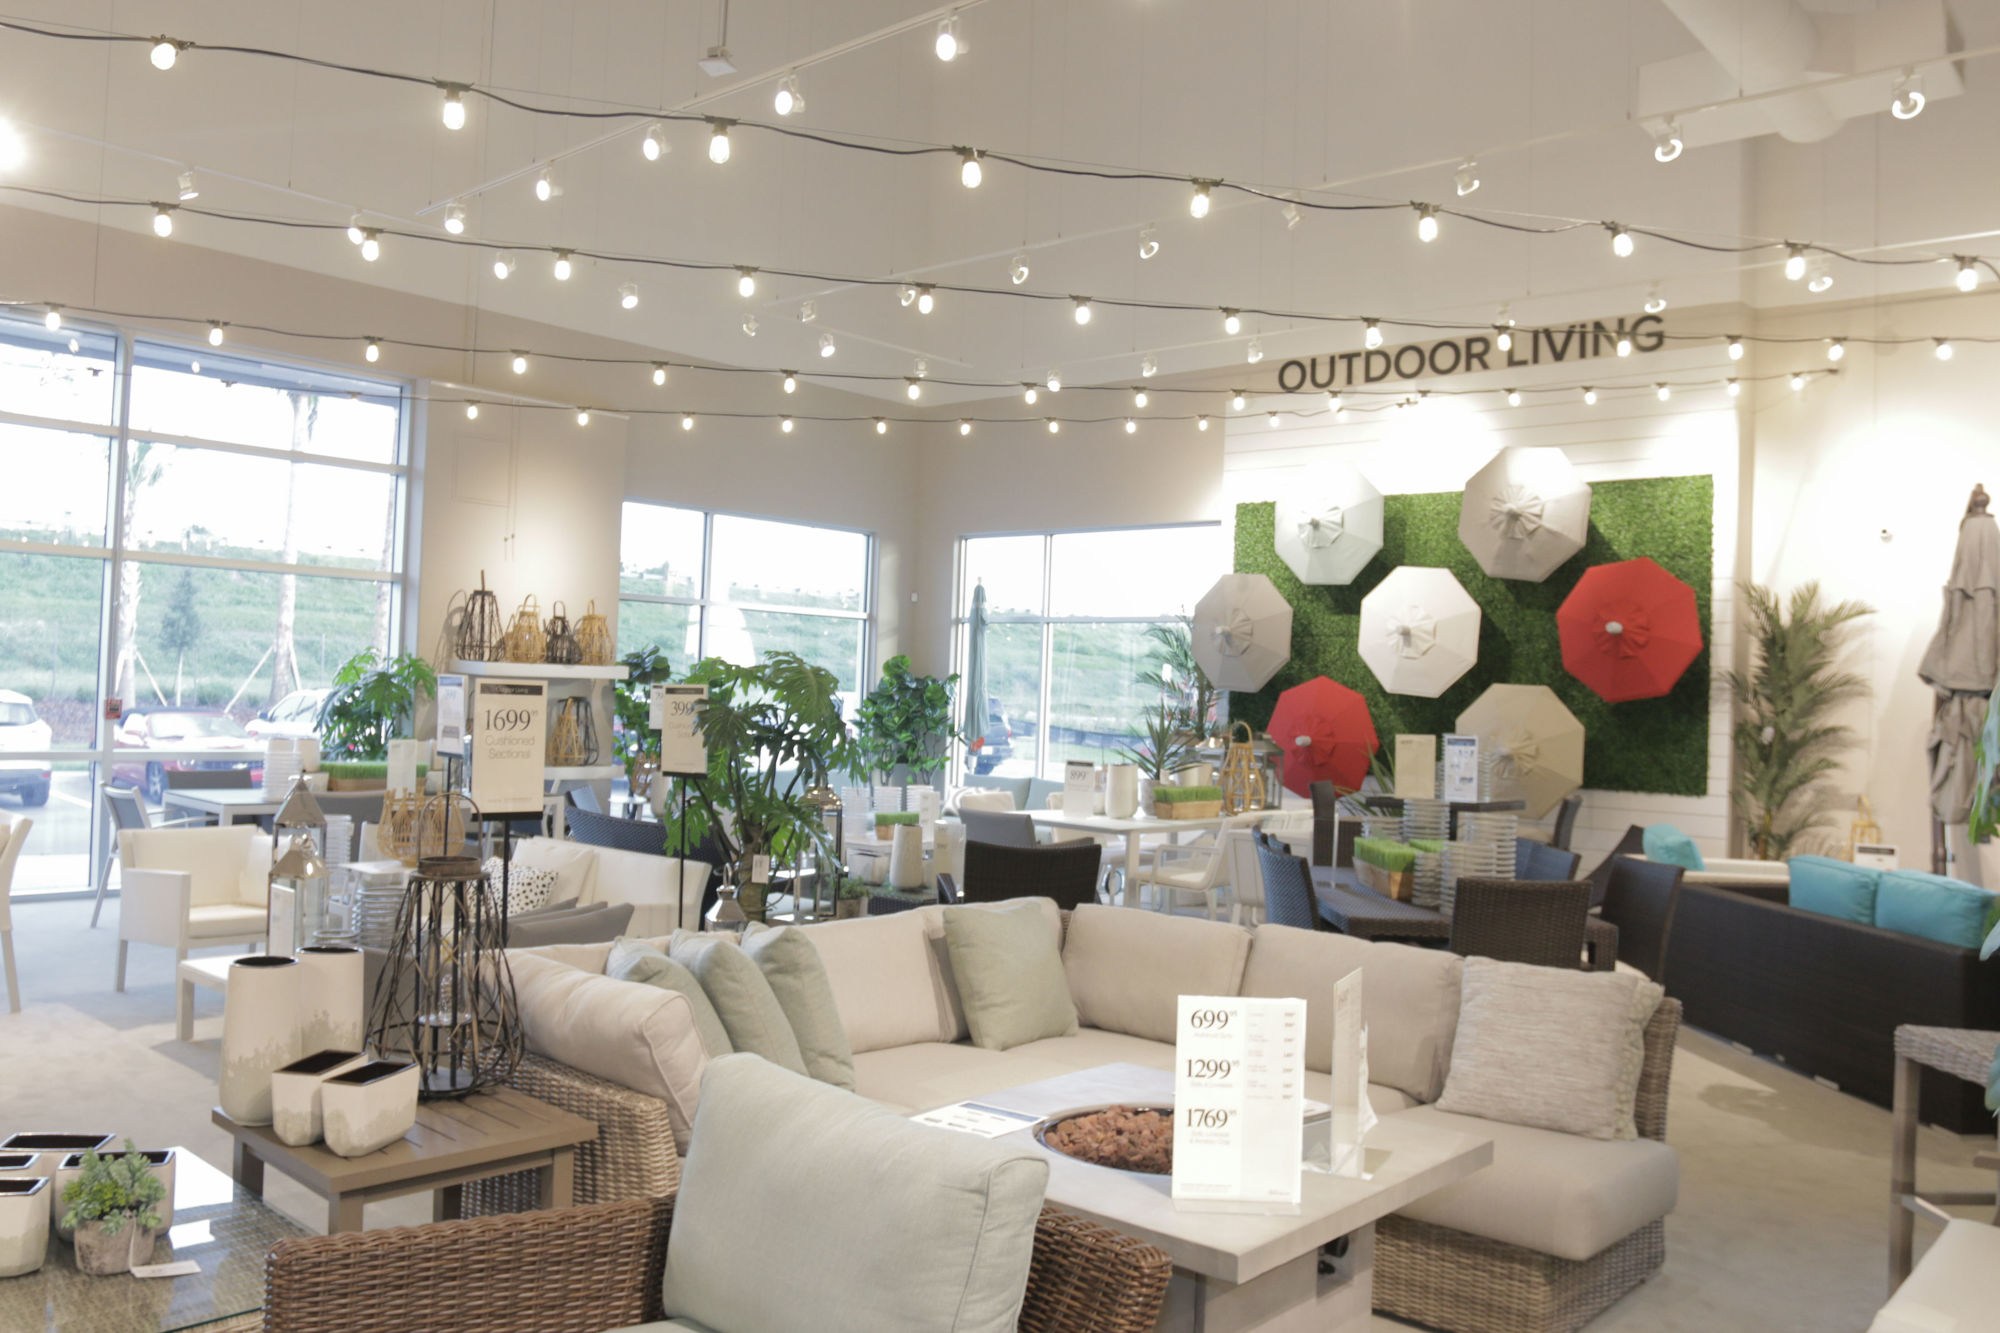 The 85,000-square-foot showroom is brightly lit, showing off its thousands of products and brands carried.